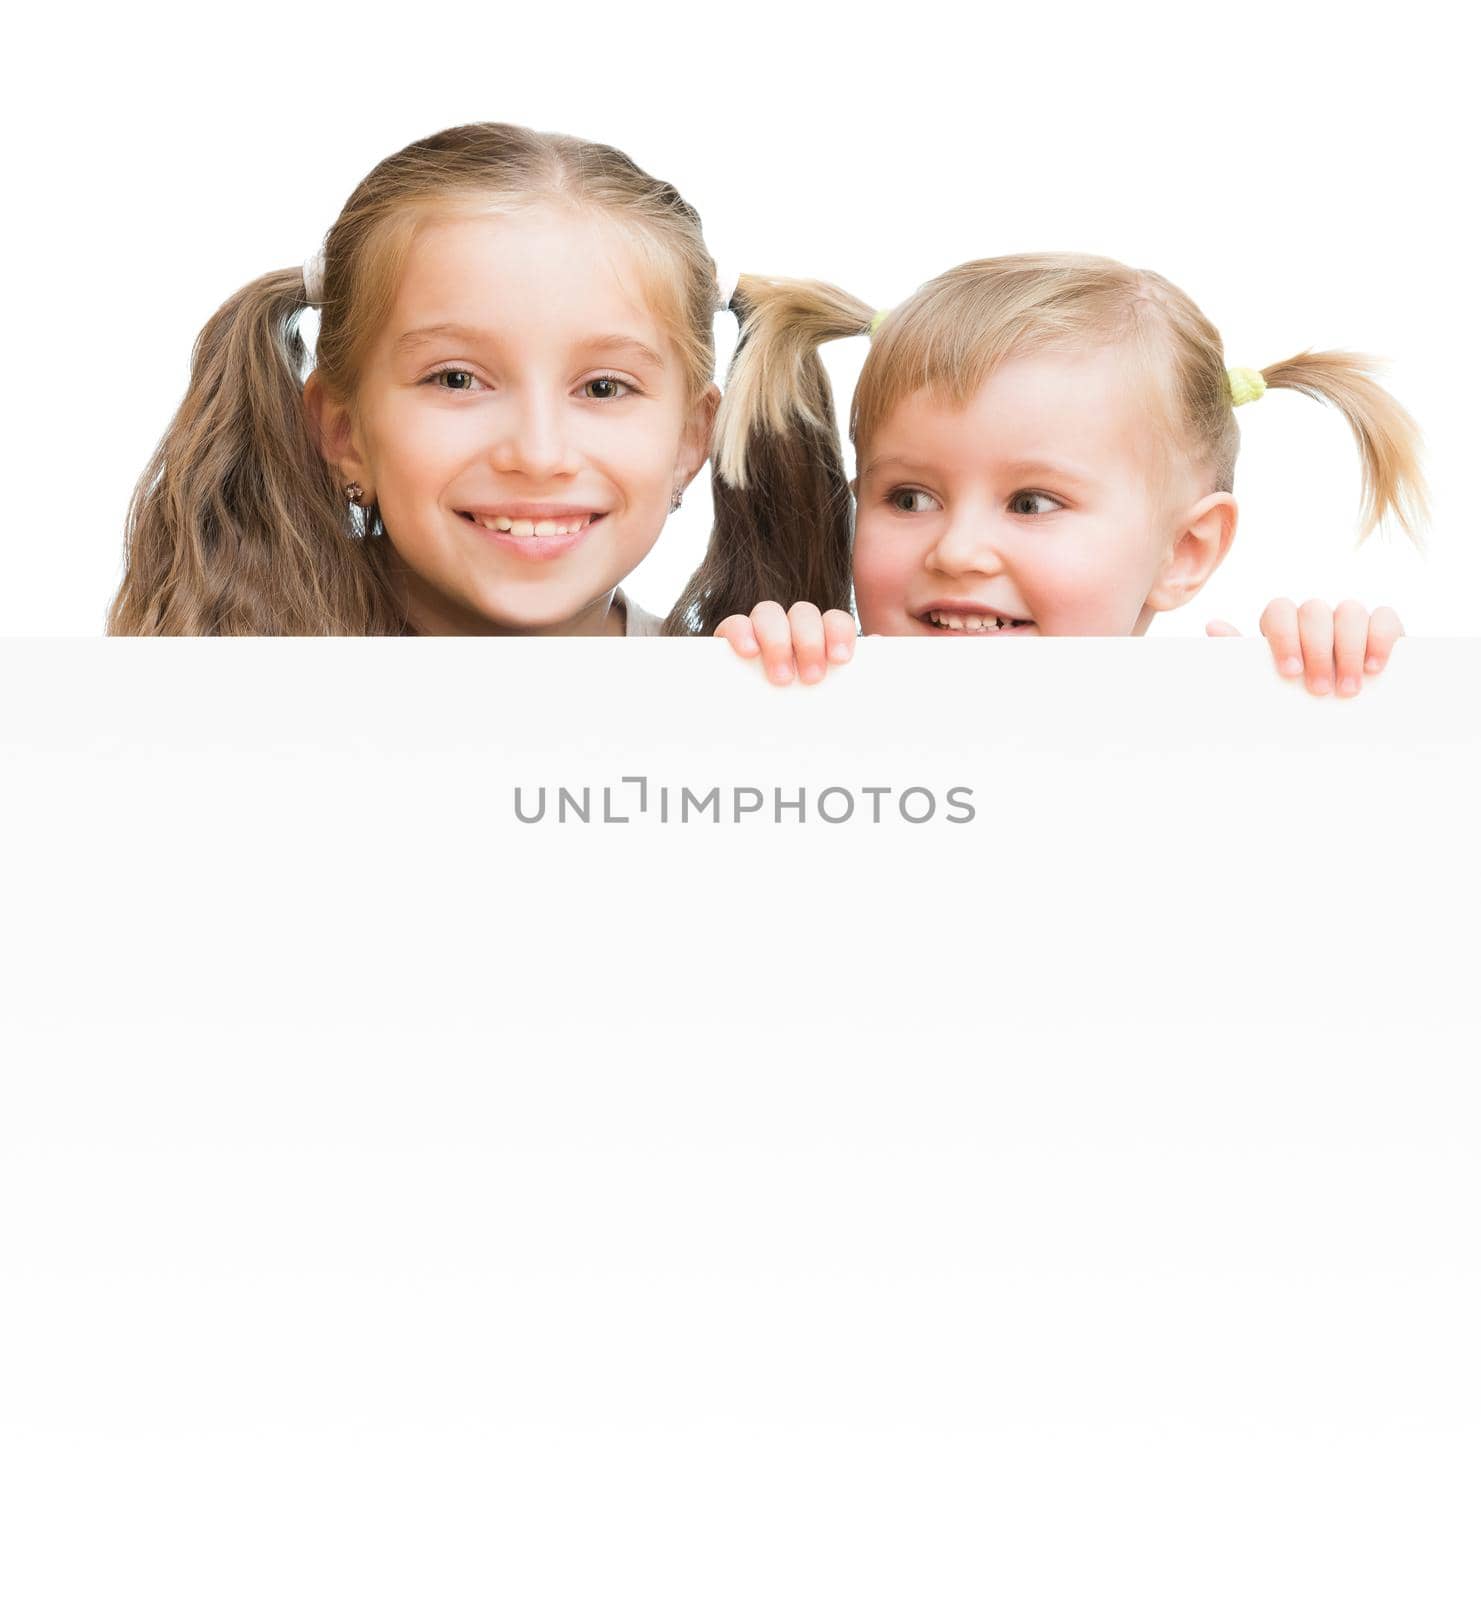 Beautiful sisters with board isolated on a white background